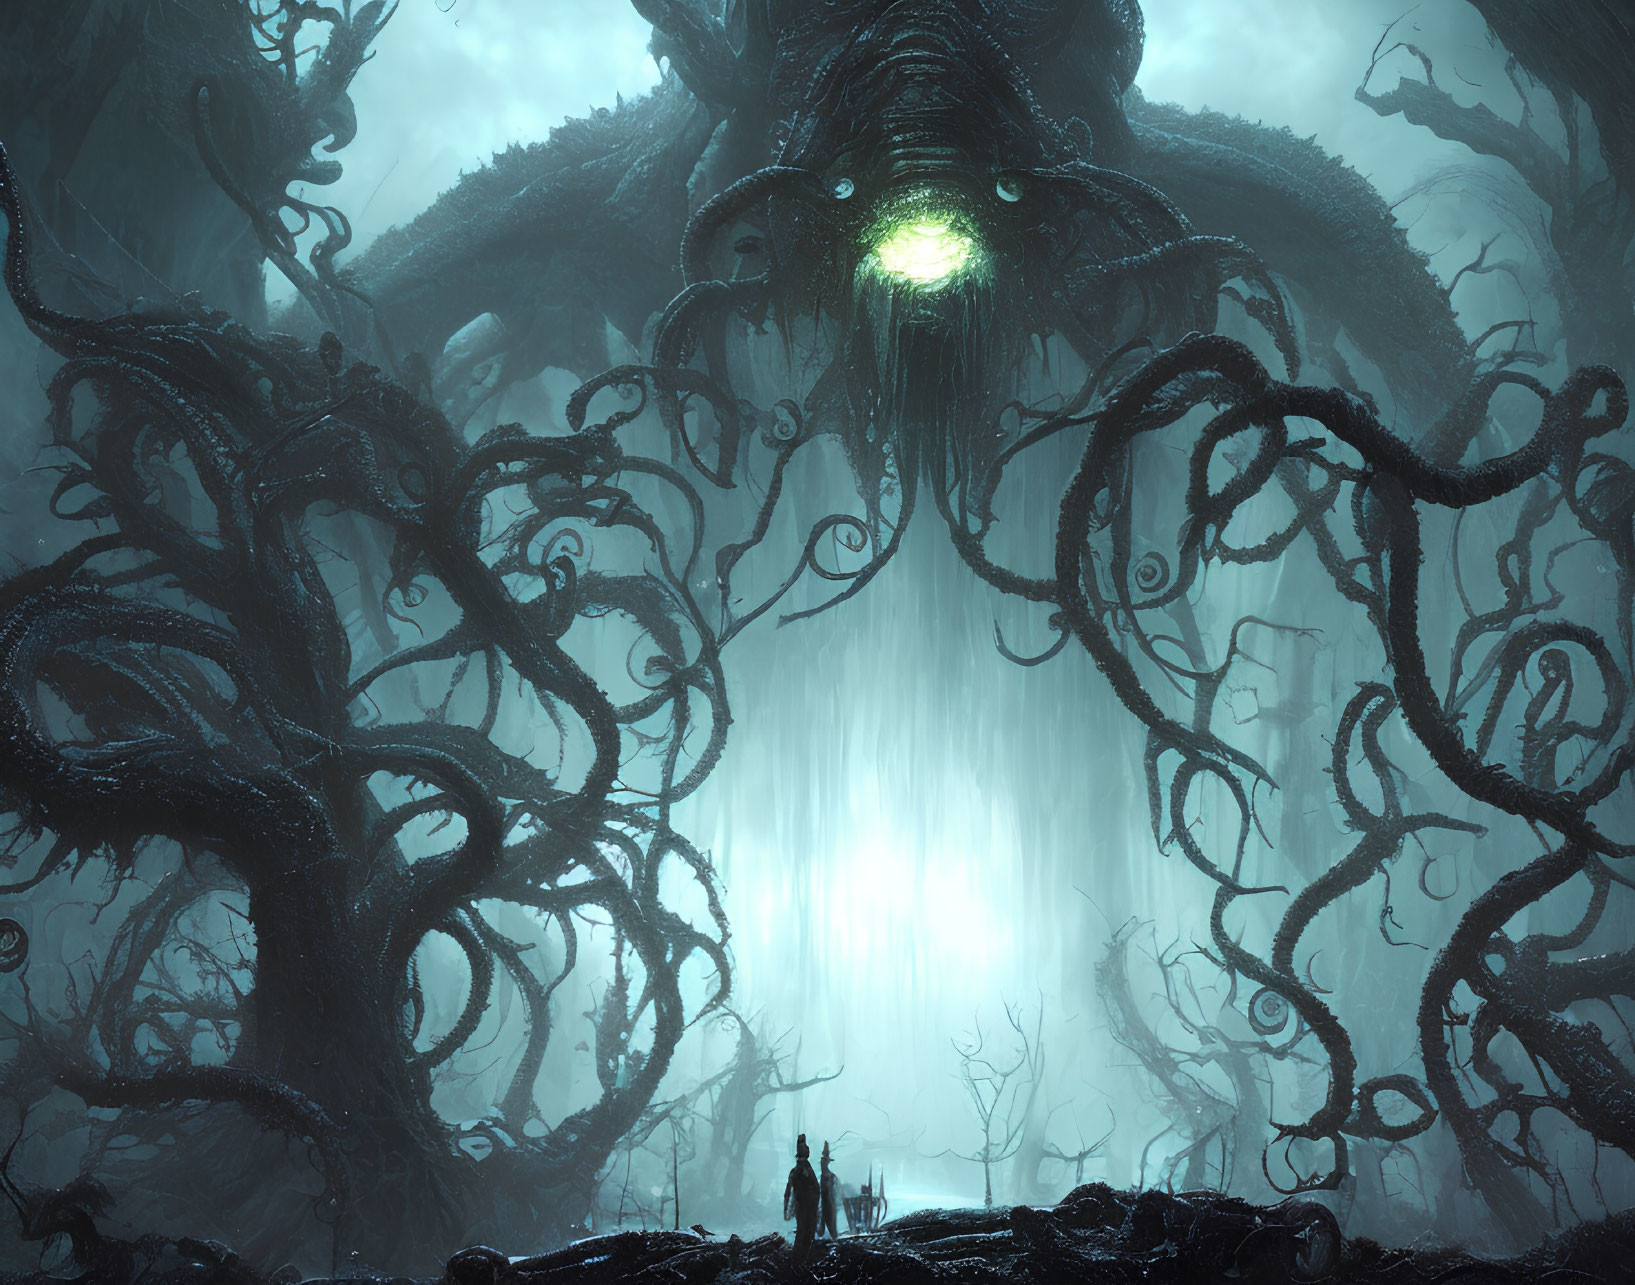 Surreal dark landscape with twisted trees, figures, and glowing-eyed creature